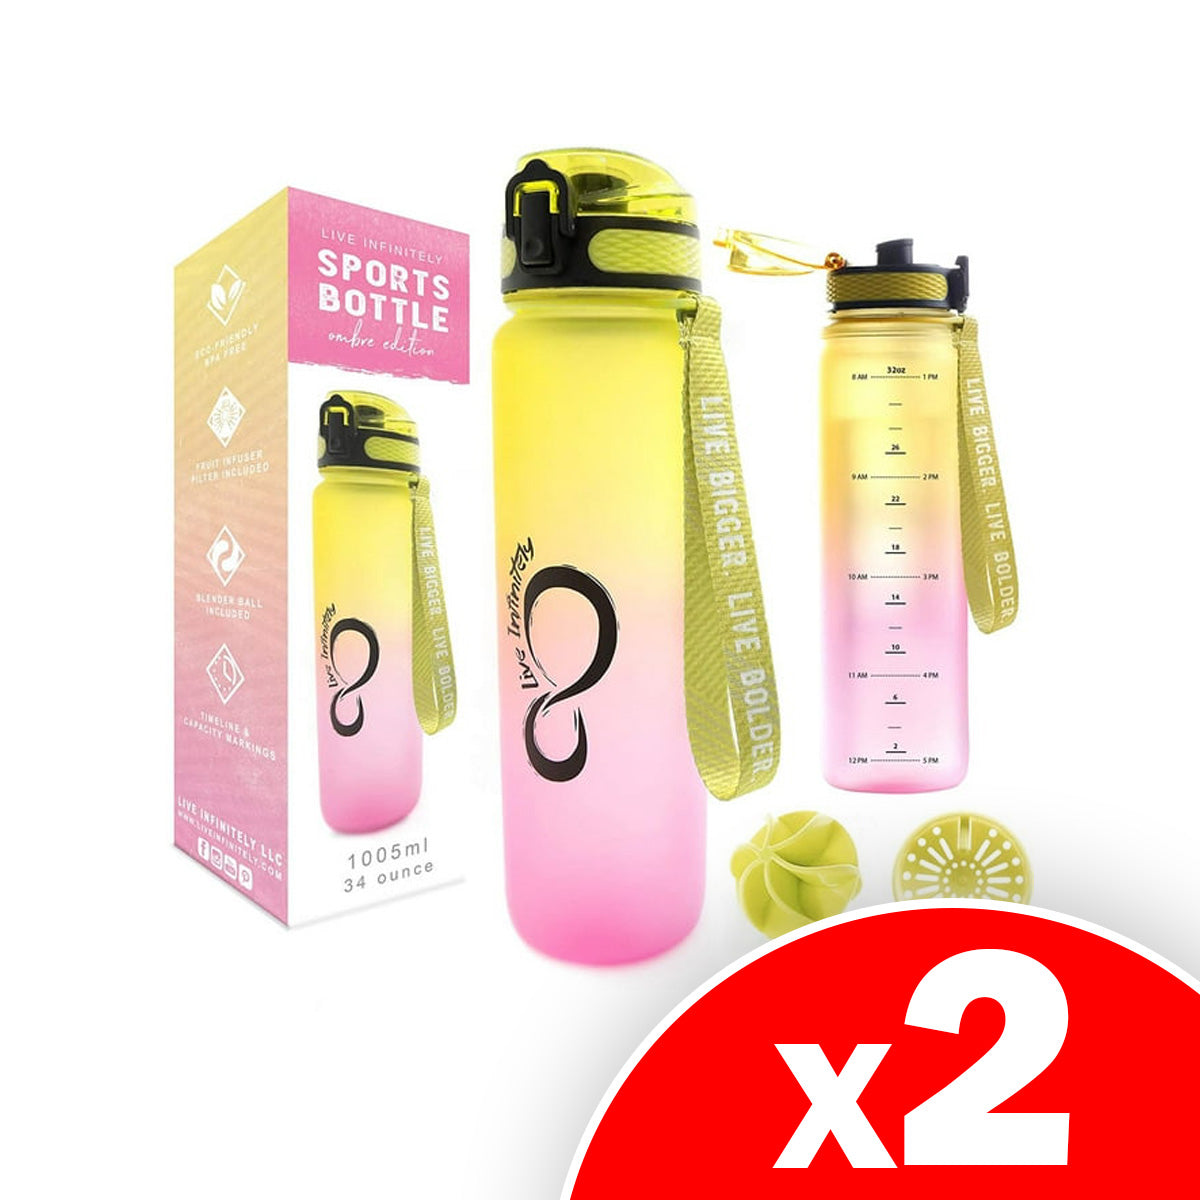 Live Infinitely Gym Water Bottle with Time Marker Fruit Infuser and Shaker 34 Oz, 2 Pack